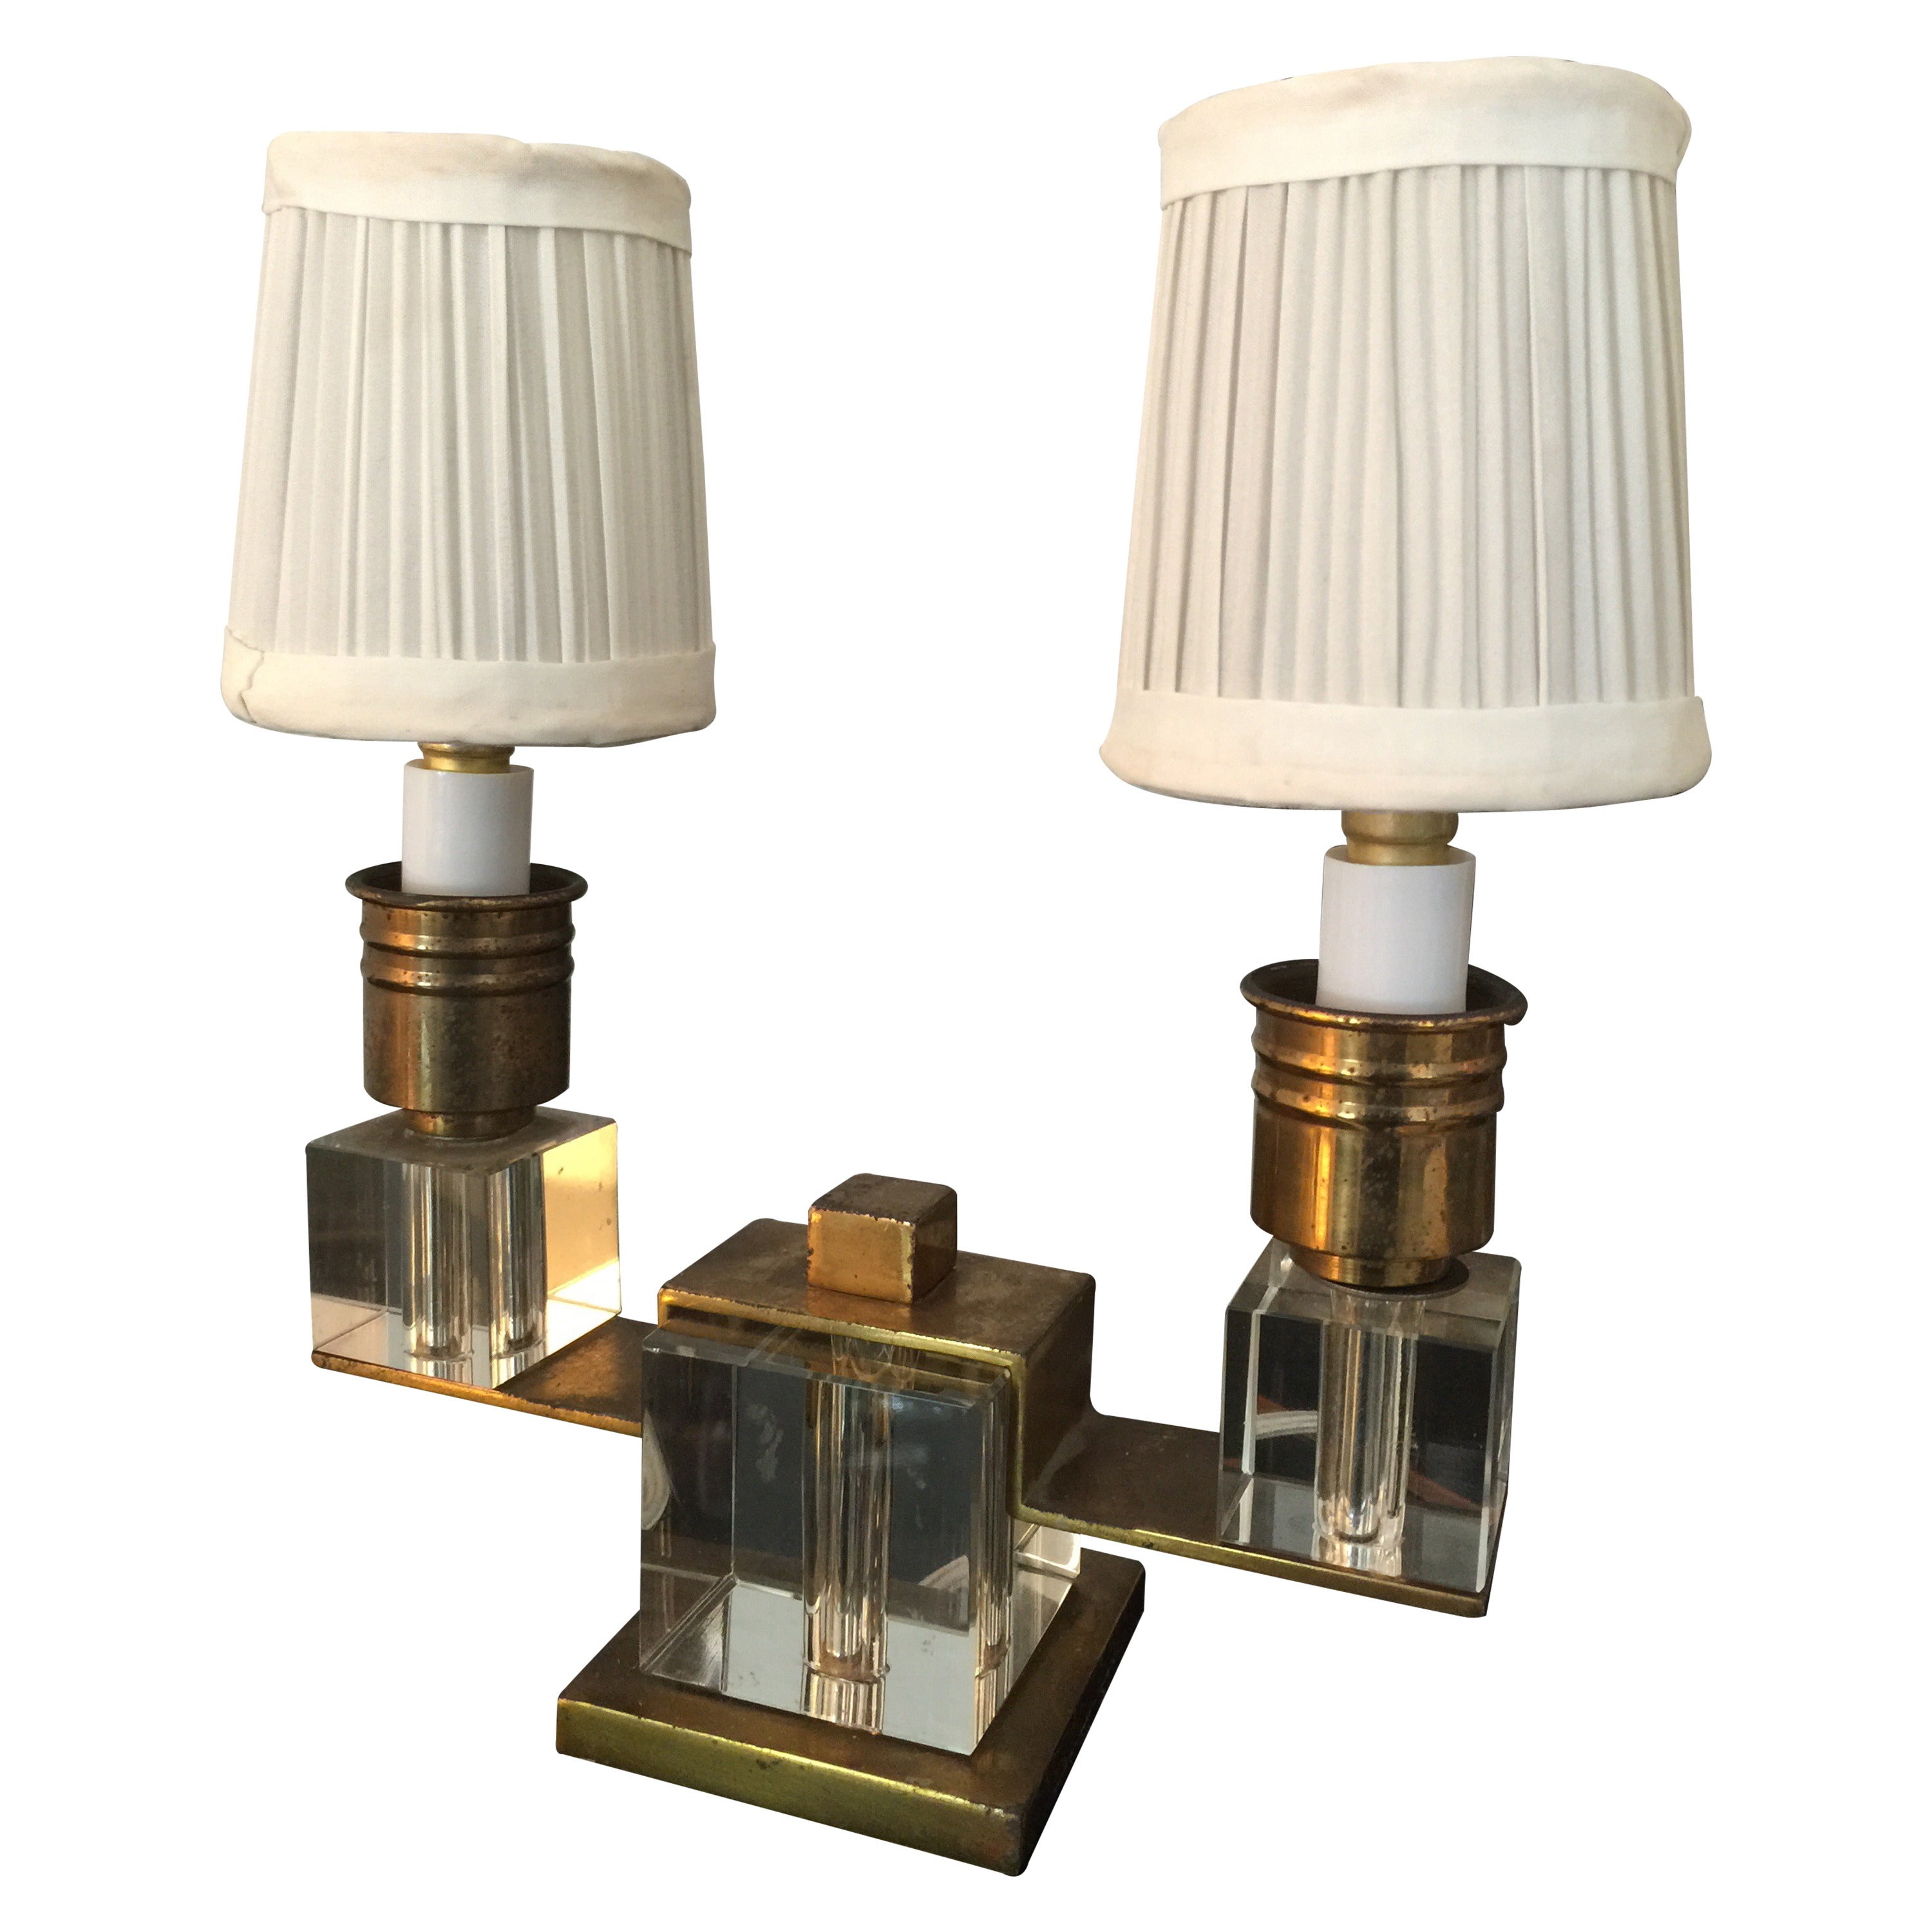 Exquisite Dore Bronze and Crystal Boudoir Lamp by Jacques Adnet